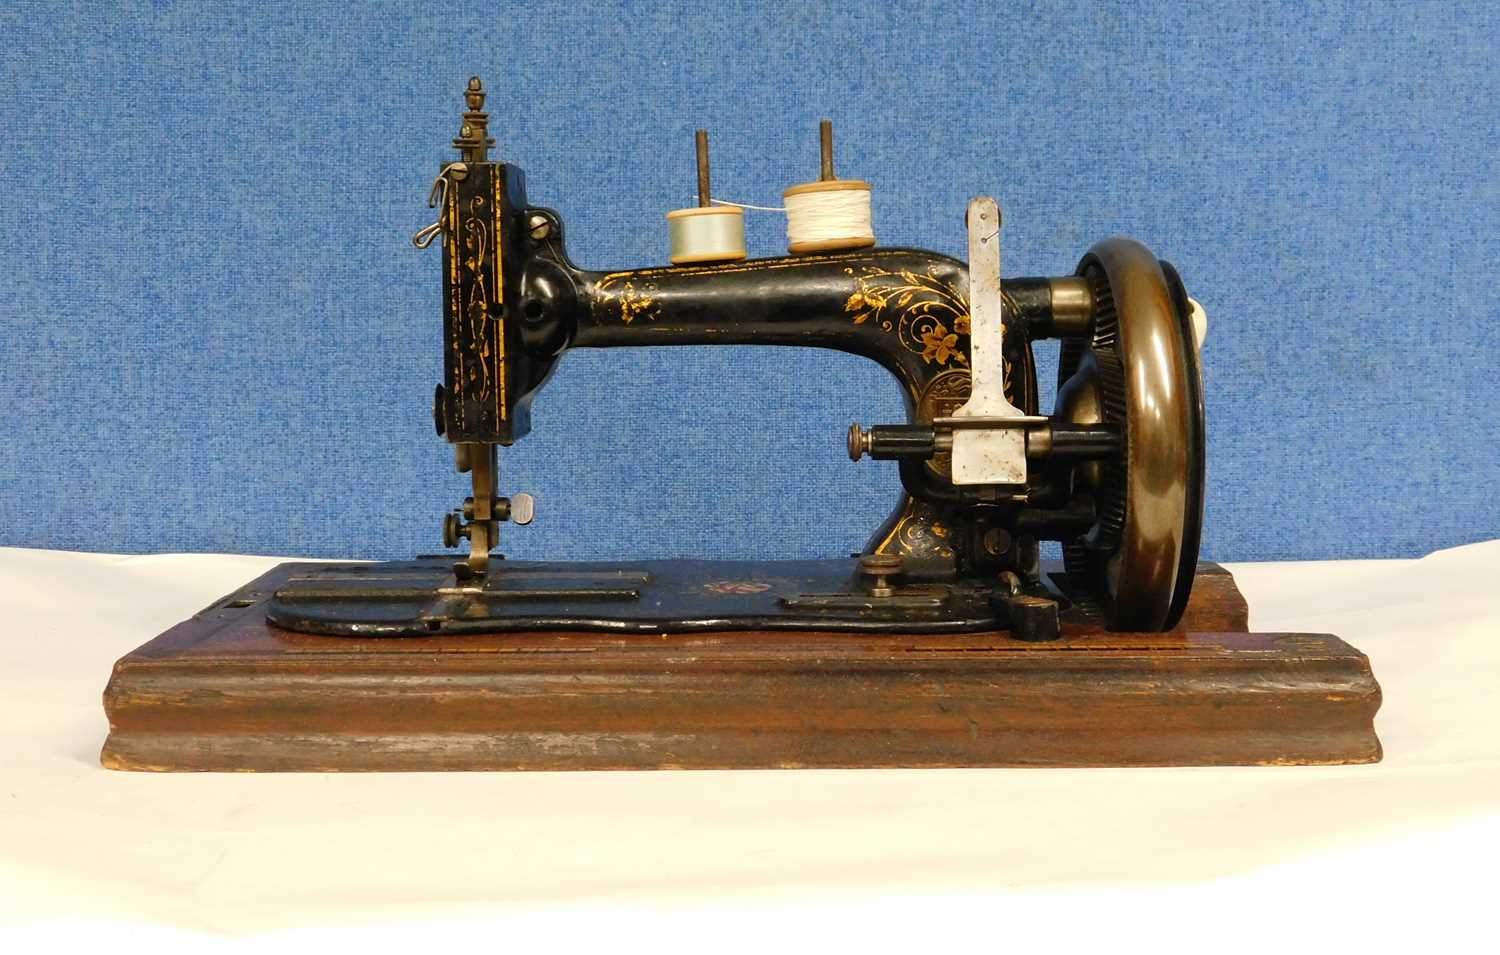 A late 19th century sewing machine, possibly German, with original carry case cover - Image 2 of 7